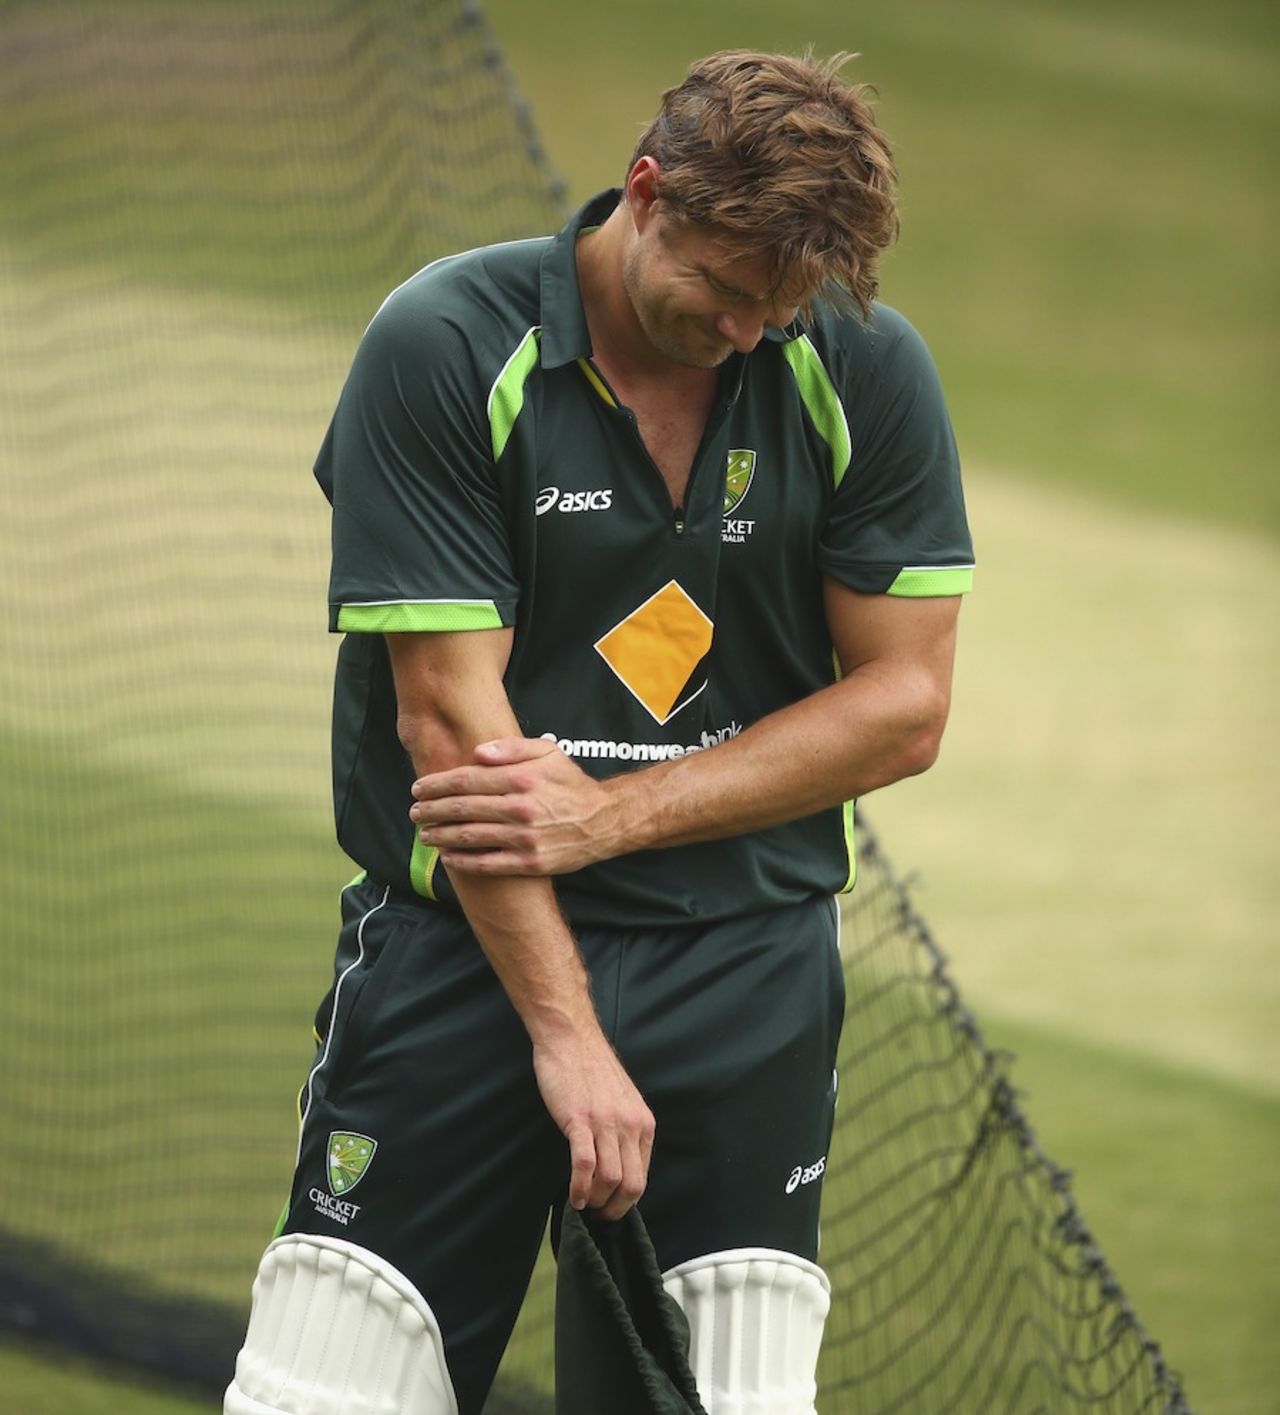 Shane Watson was hit on the arm, Adelaide, December 6, 2014